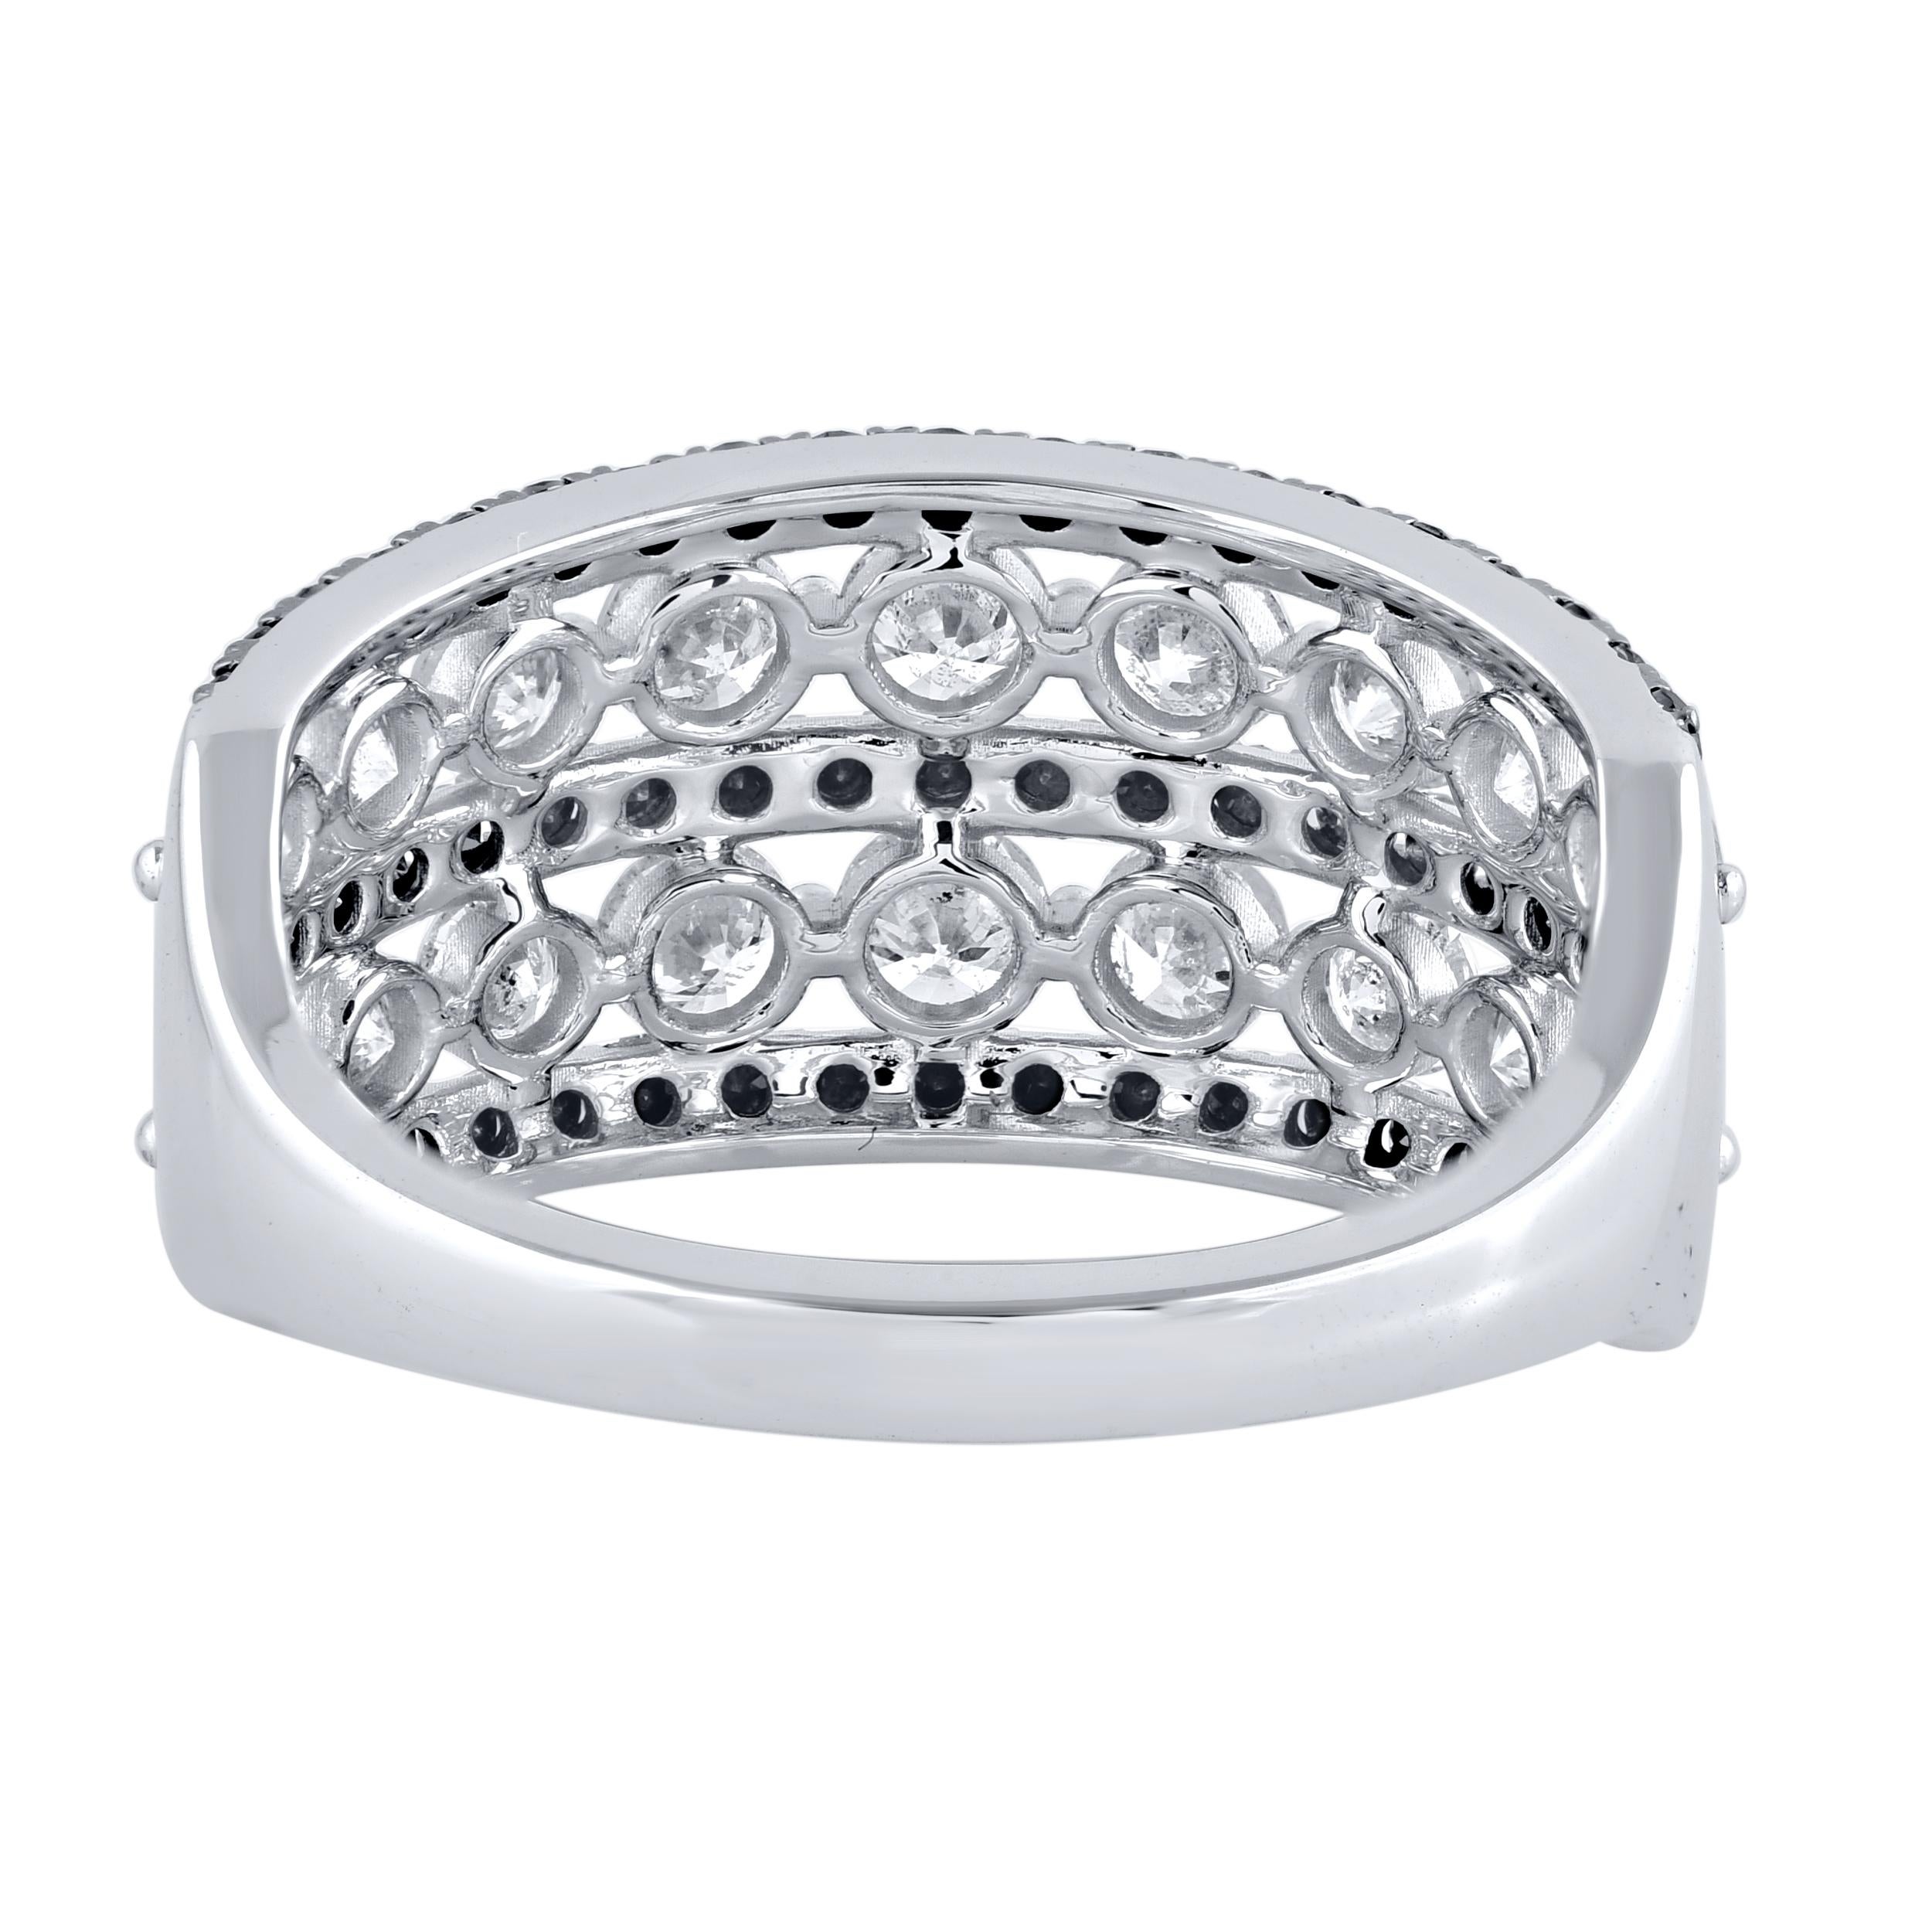 This beautiful band ring features shimmering brilliant cut diamonds and treated black diamond in prong setting. Crafted in 14 karat white gold. The ring is studded with a total of 75 brilliant cut natural round diamonds and the total diamond weight